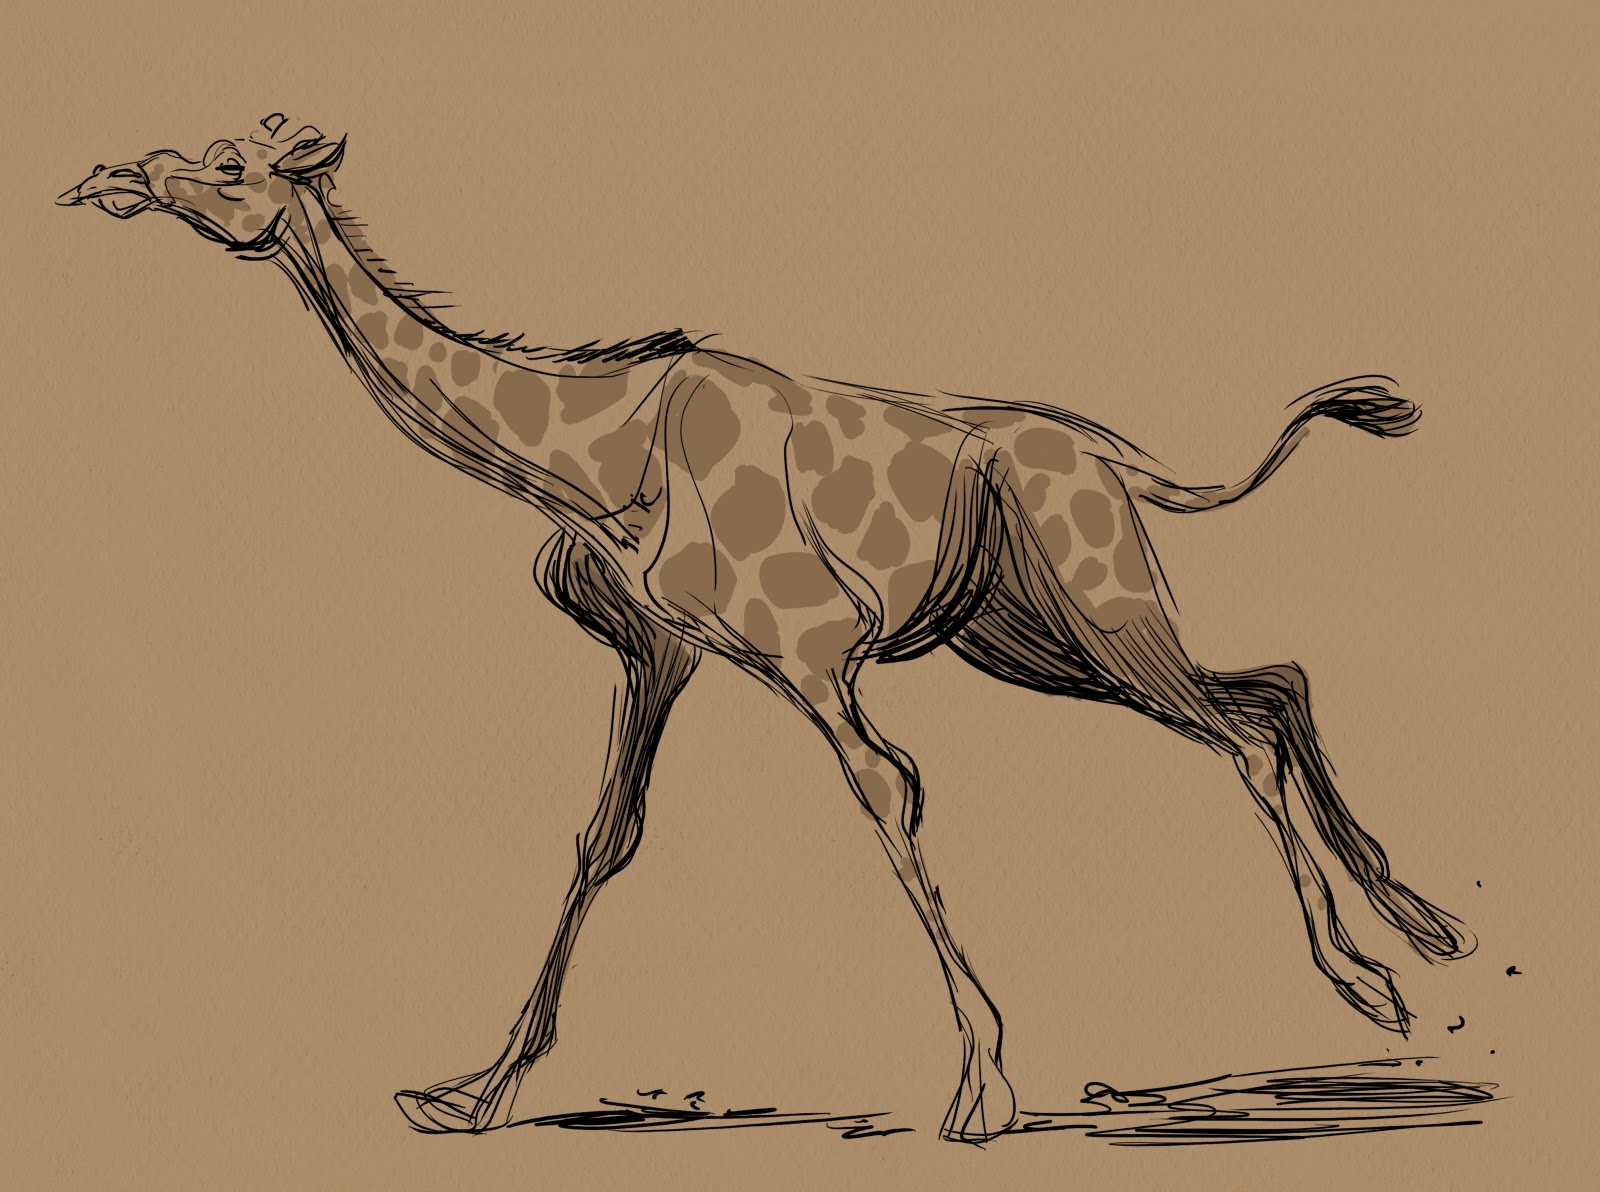 New Giraffe Sketch Drawing with simple drawing